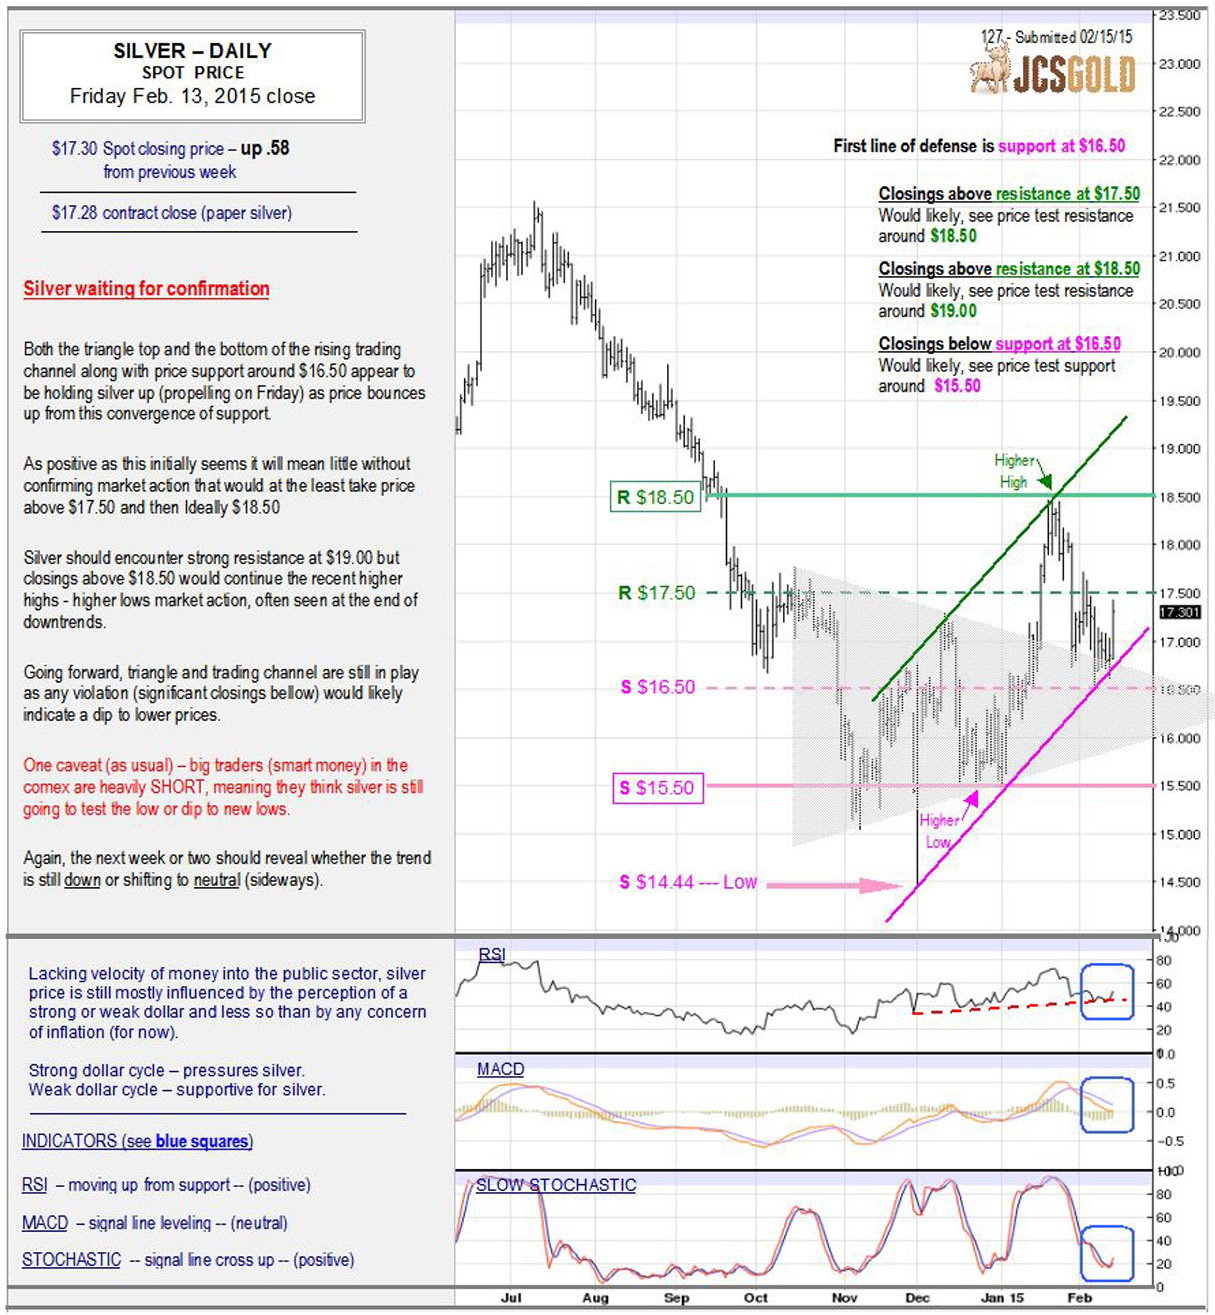 Feb 13, 2015 chart & commentary